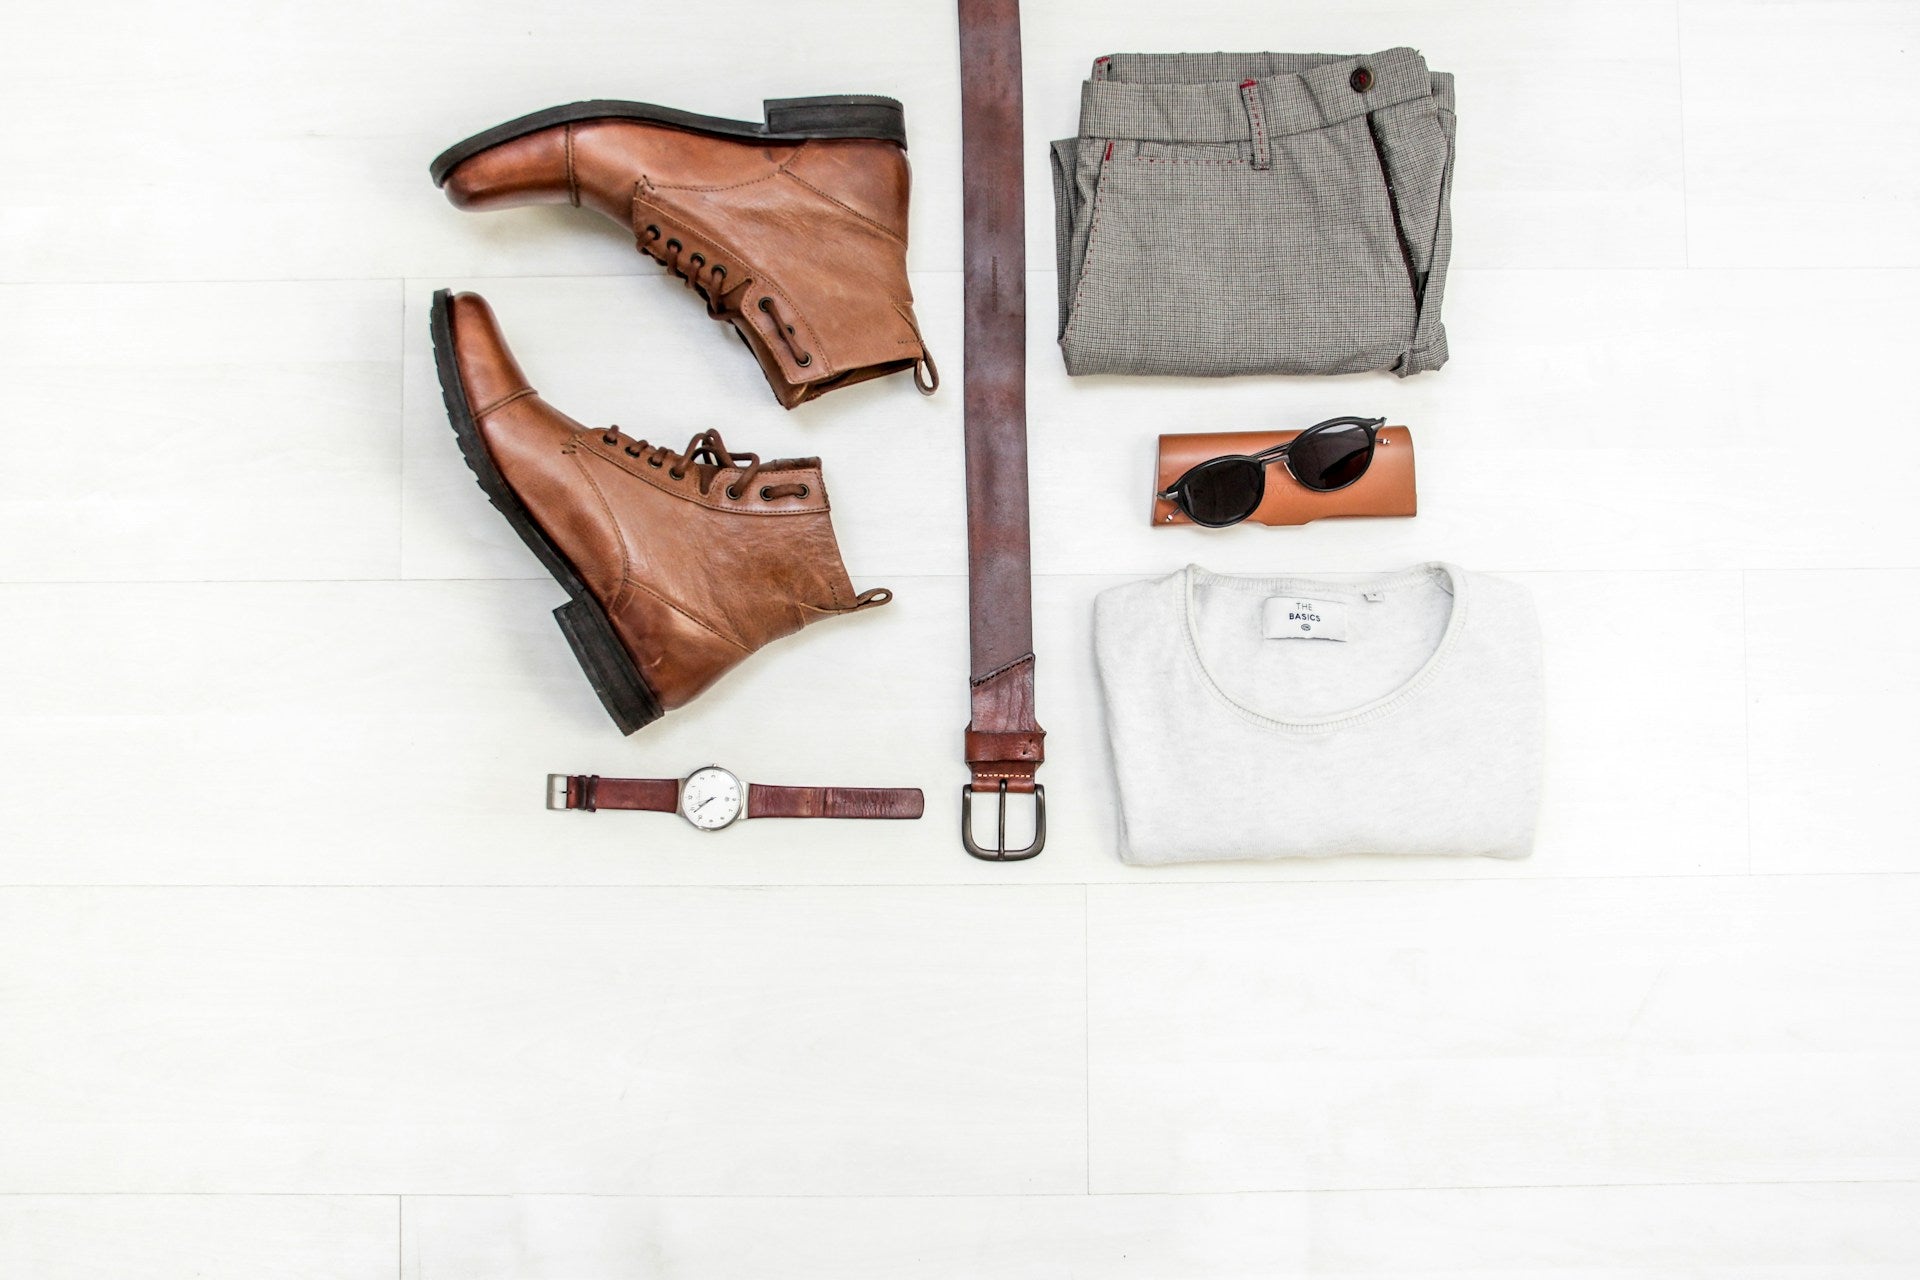 A professional attire outfit in shades of brown and beige.